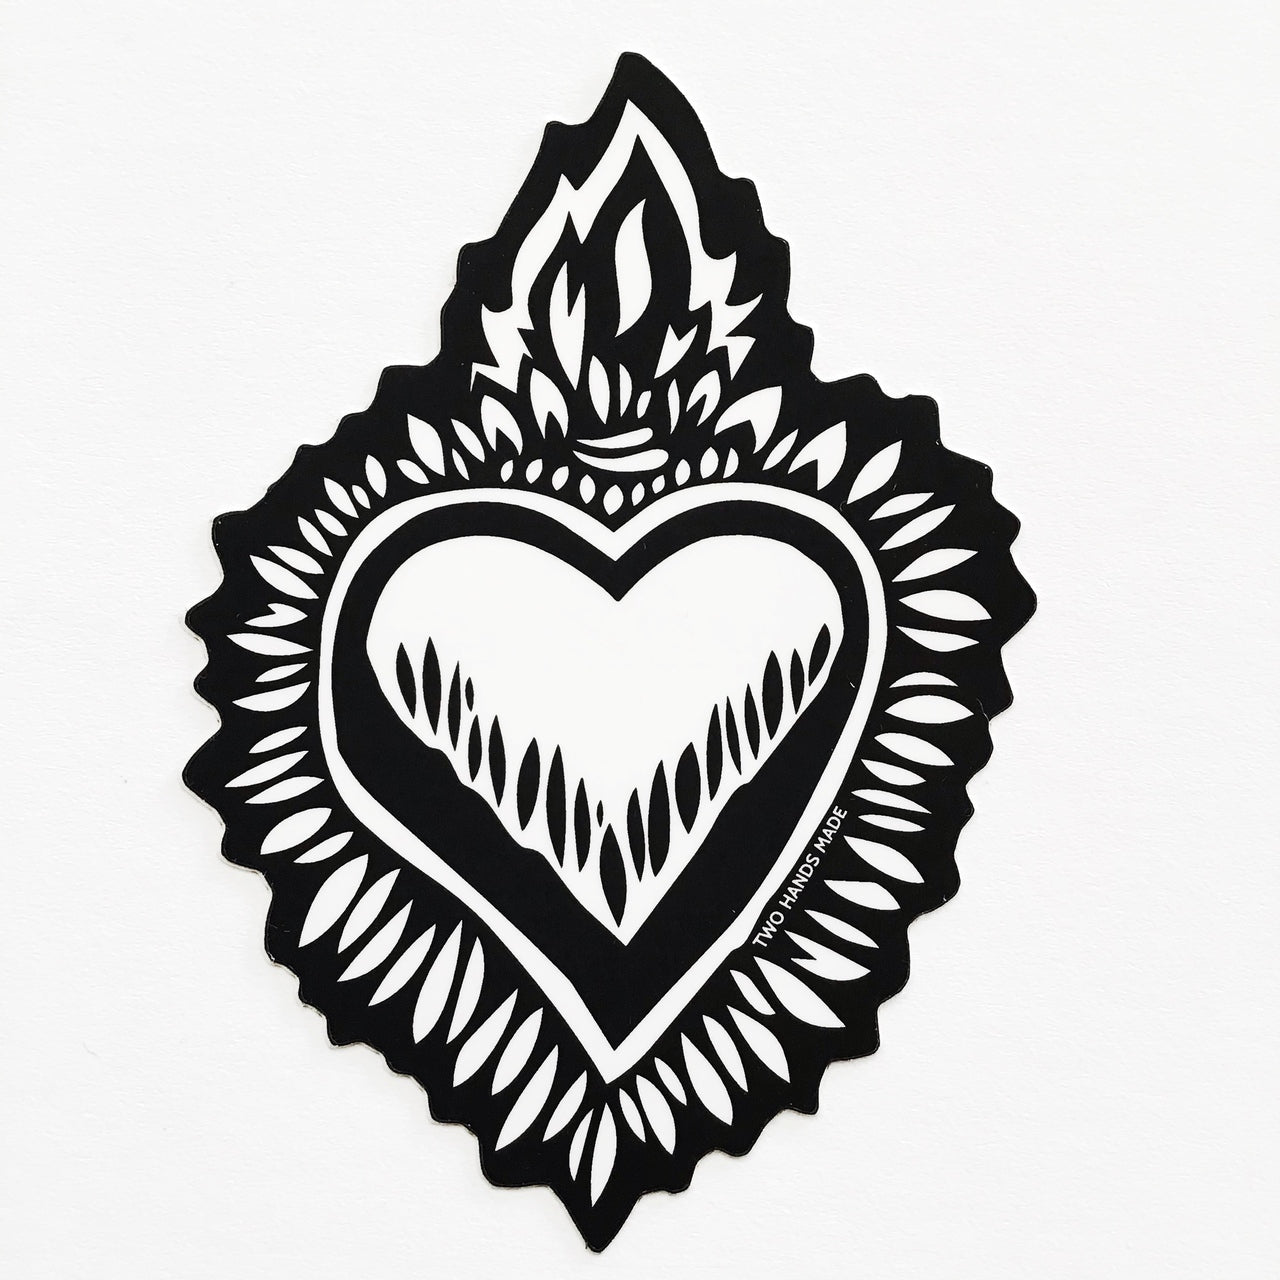 Mini Pack - One Inch Vinyl Heart Stickers